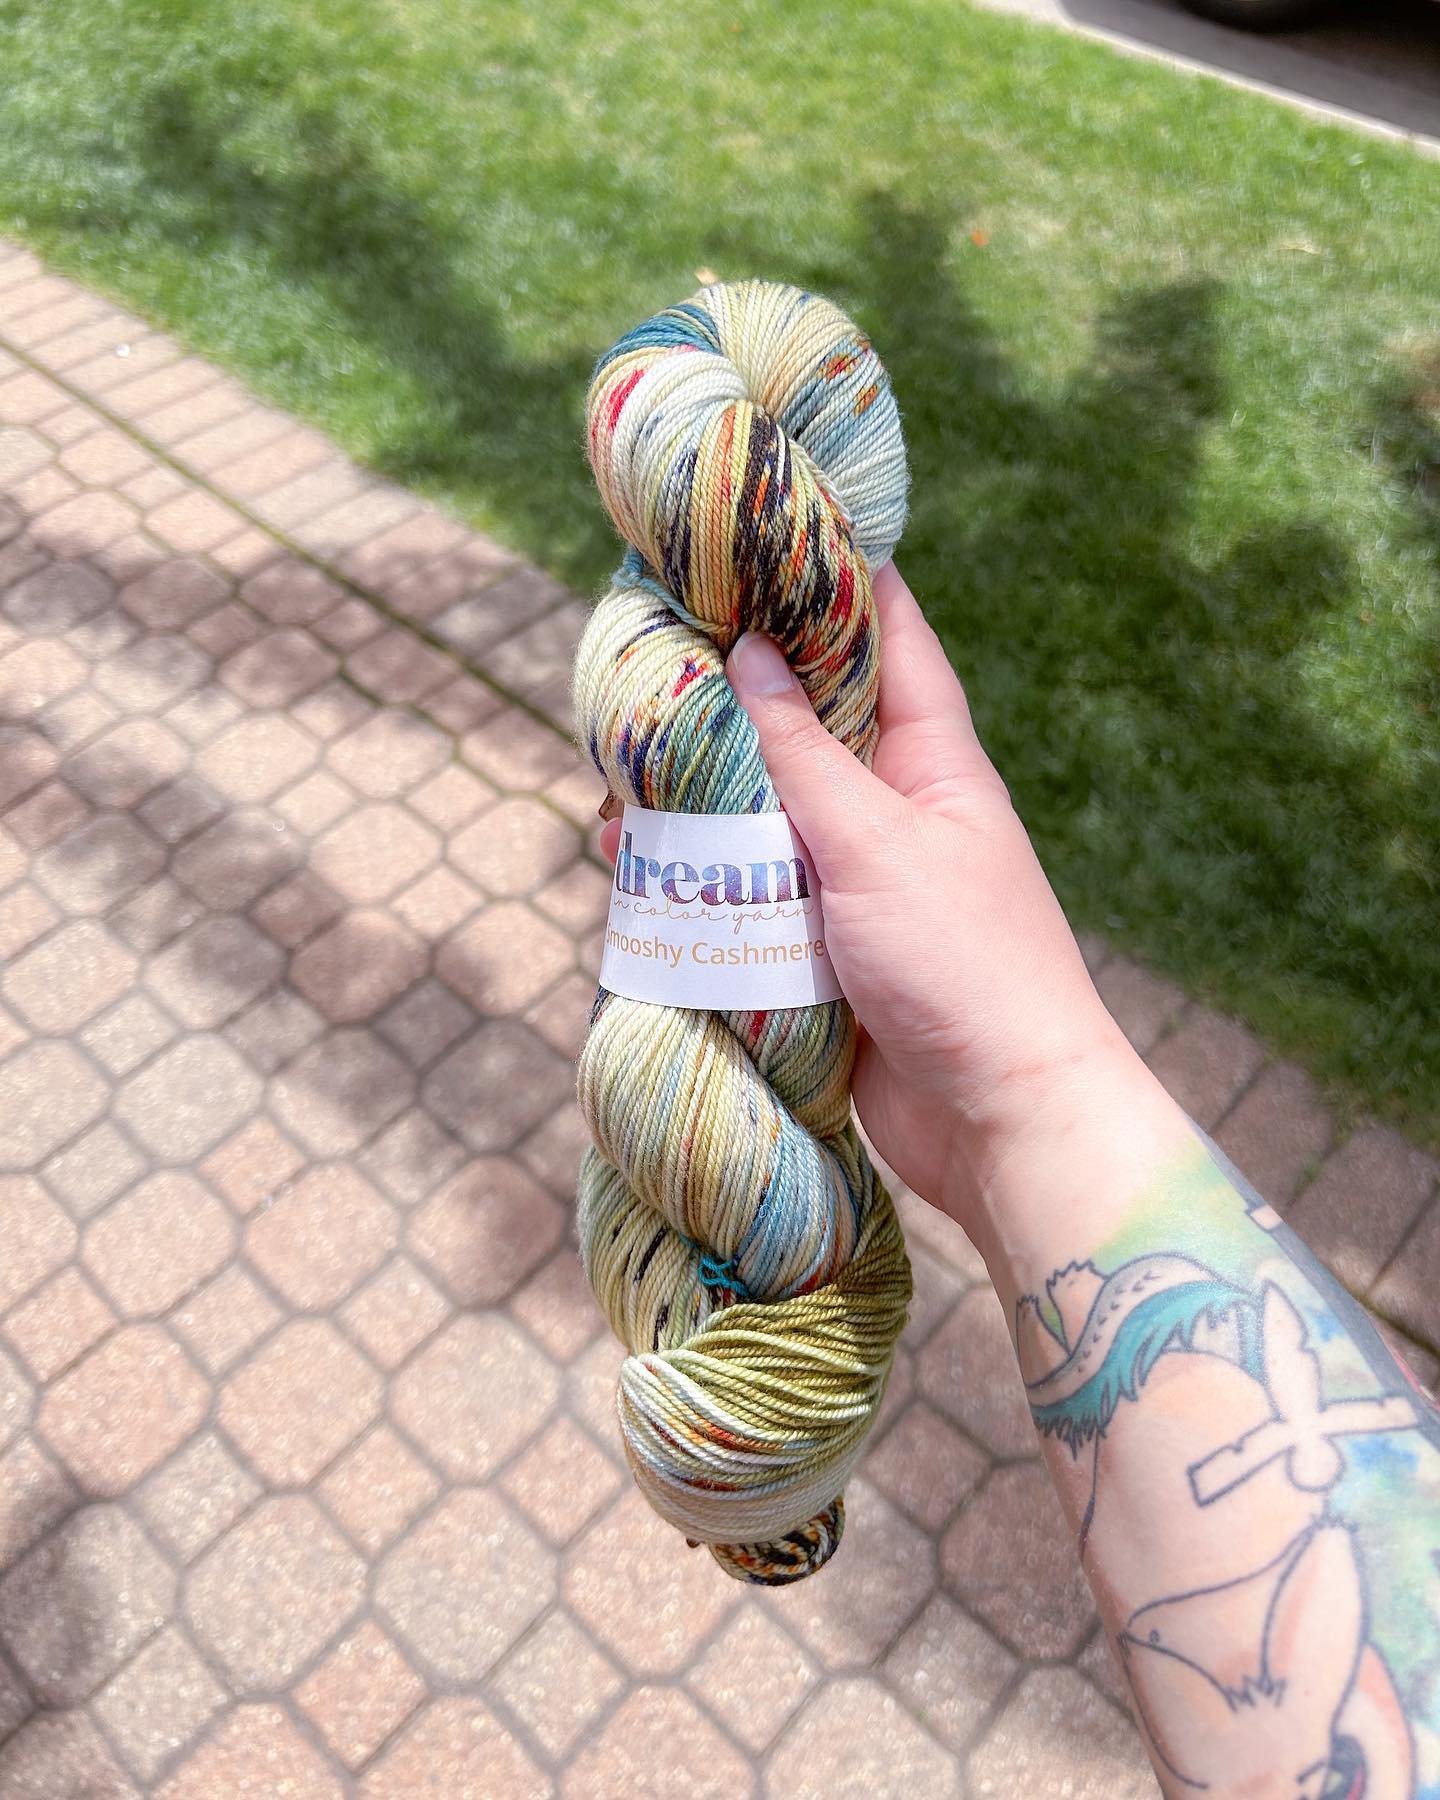 10000% recommend visiting Holland, MI during @tulip_time in May! A few highlights:
Grabbing this gorgeous, Tulip Festival inspired colorway &ldquo;Pedals and Petals&rdquo; dyed by @dreamincoloryarn purchased at @garenhuis_yarn_studio 
Snacks &amp; dr